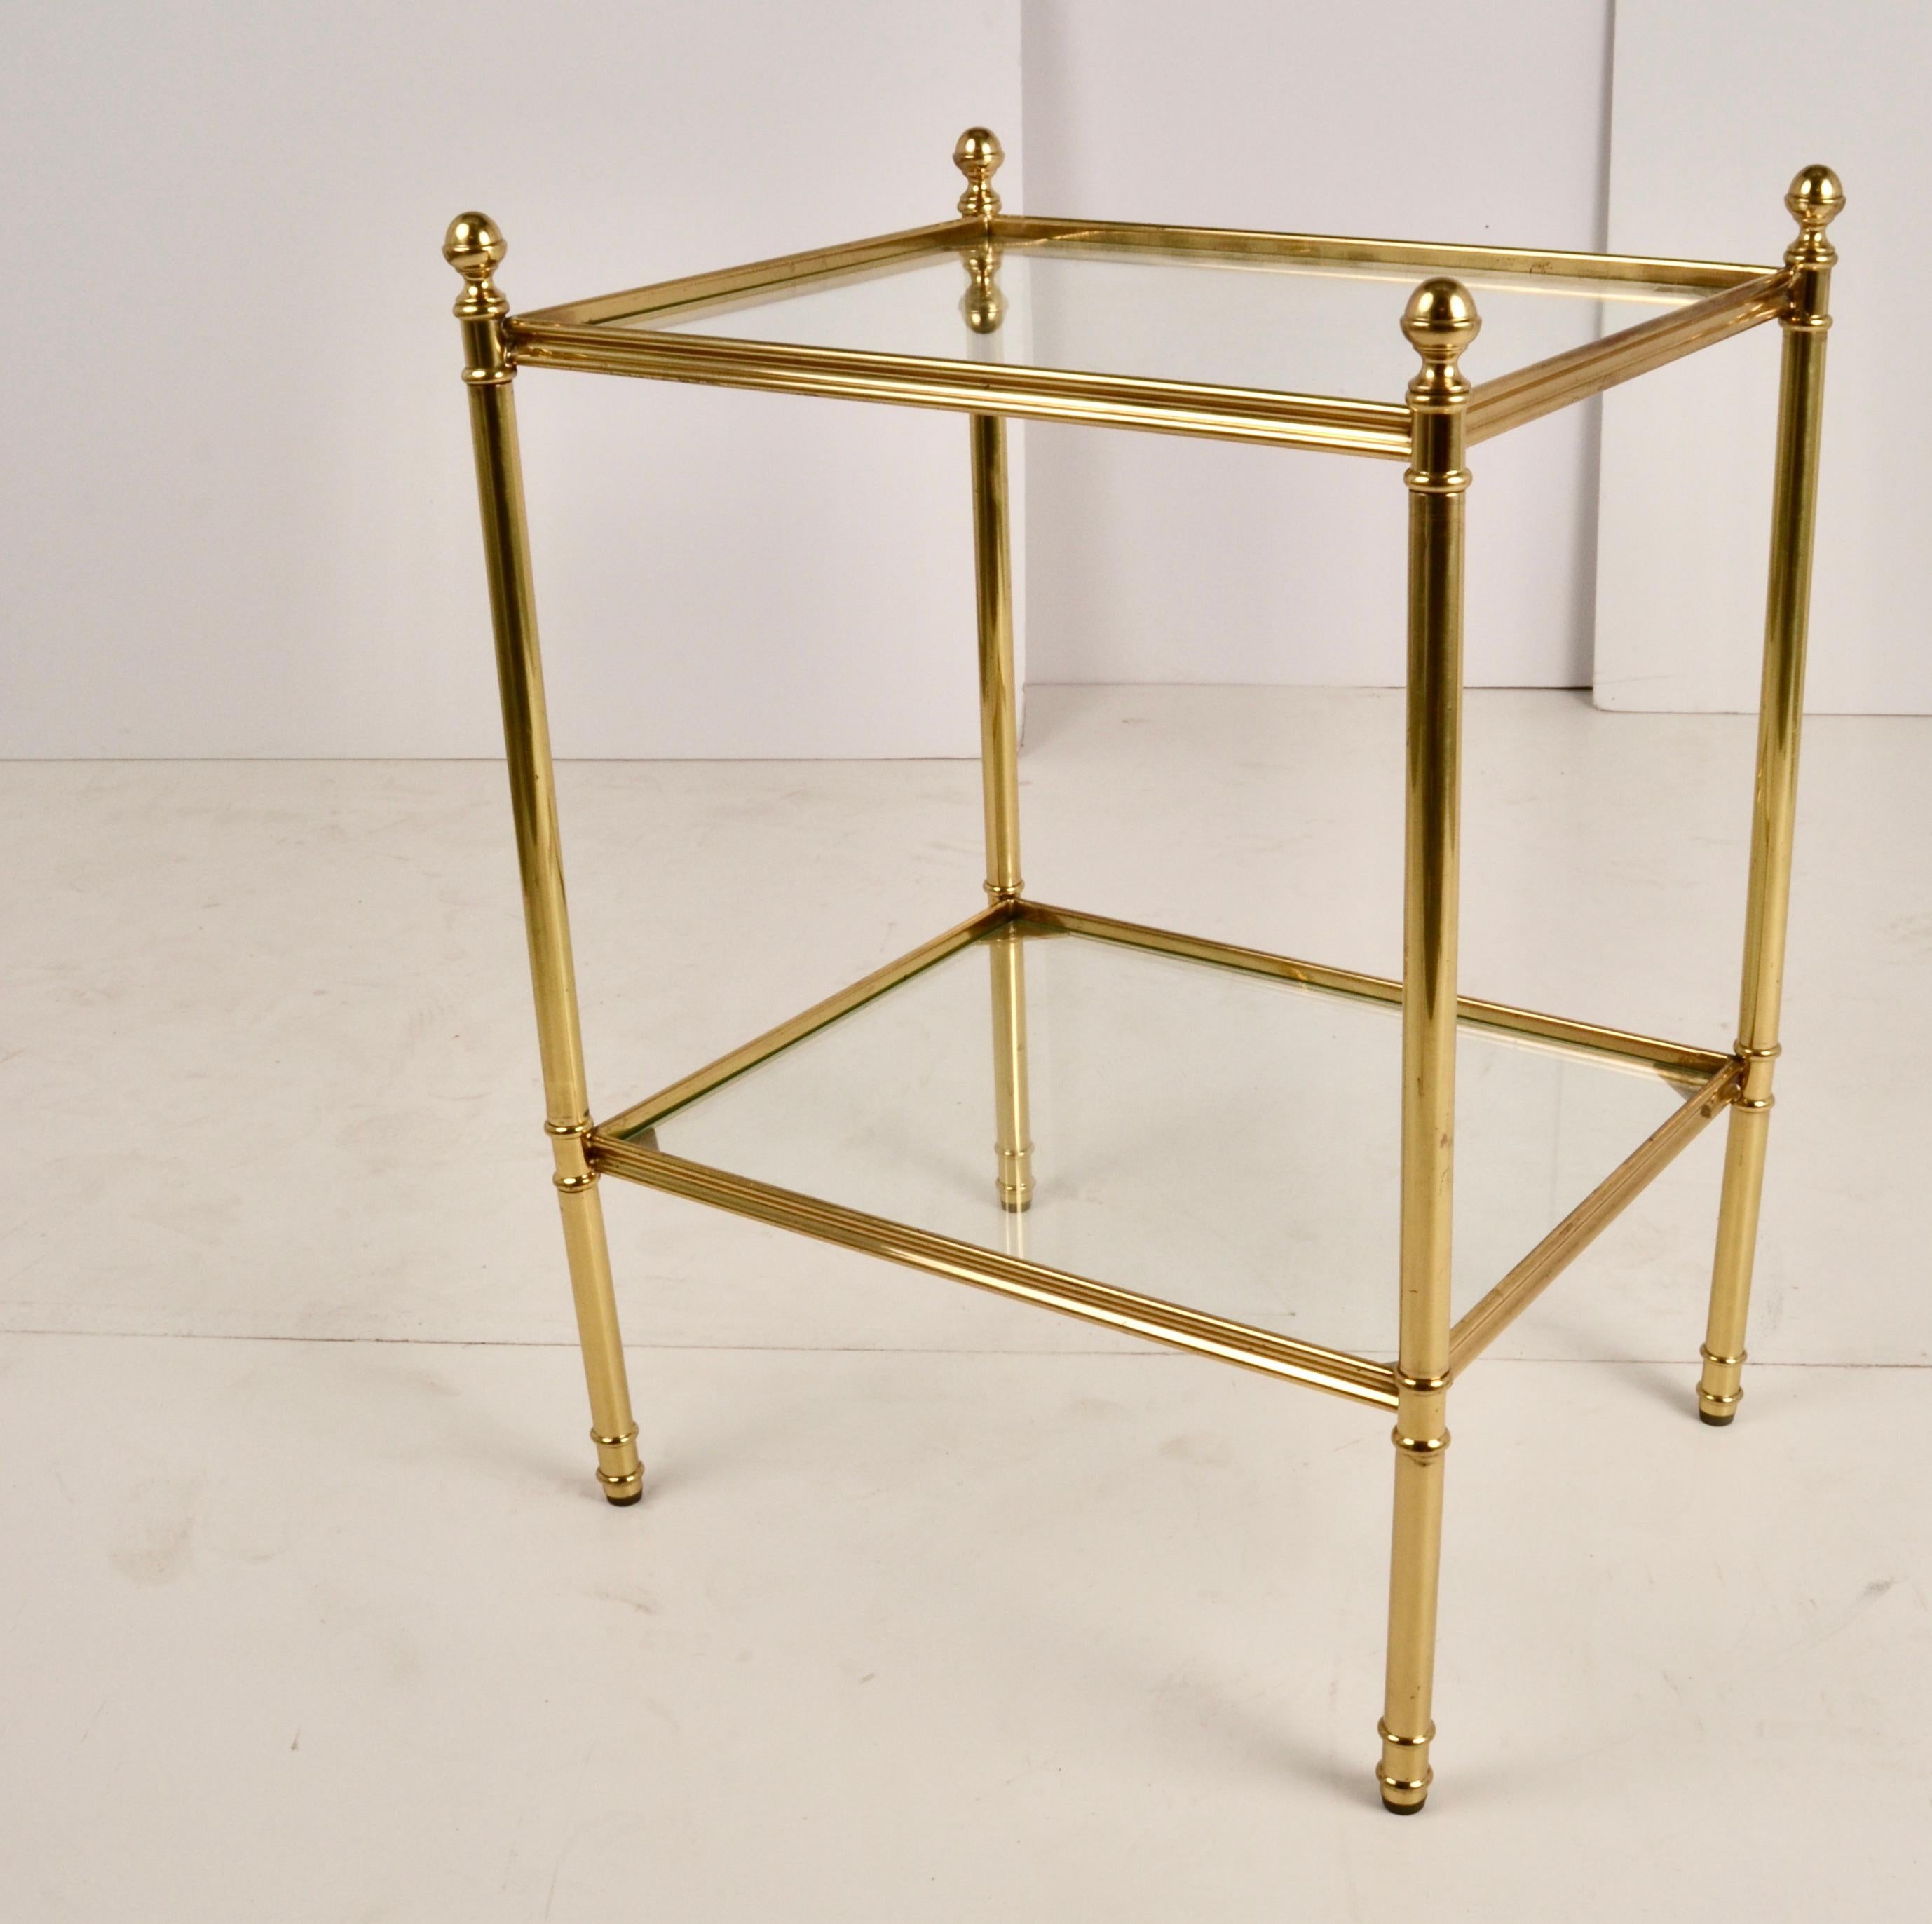 Classic two-tier brass side table with glass top and shelf. Turned round legs are topped with ball finials. Newly polished and lacquered.